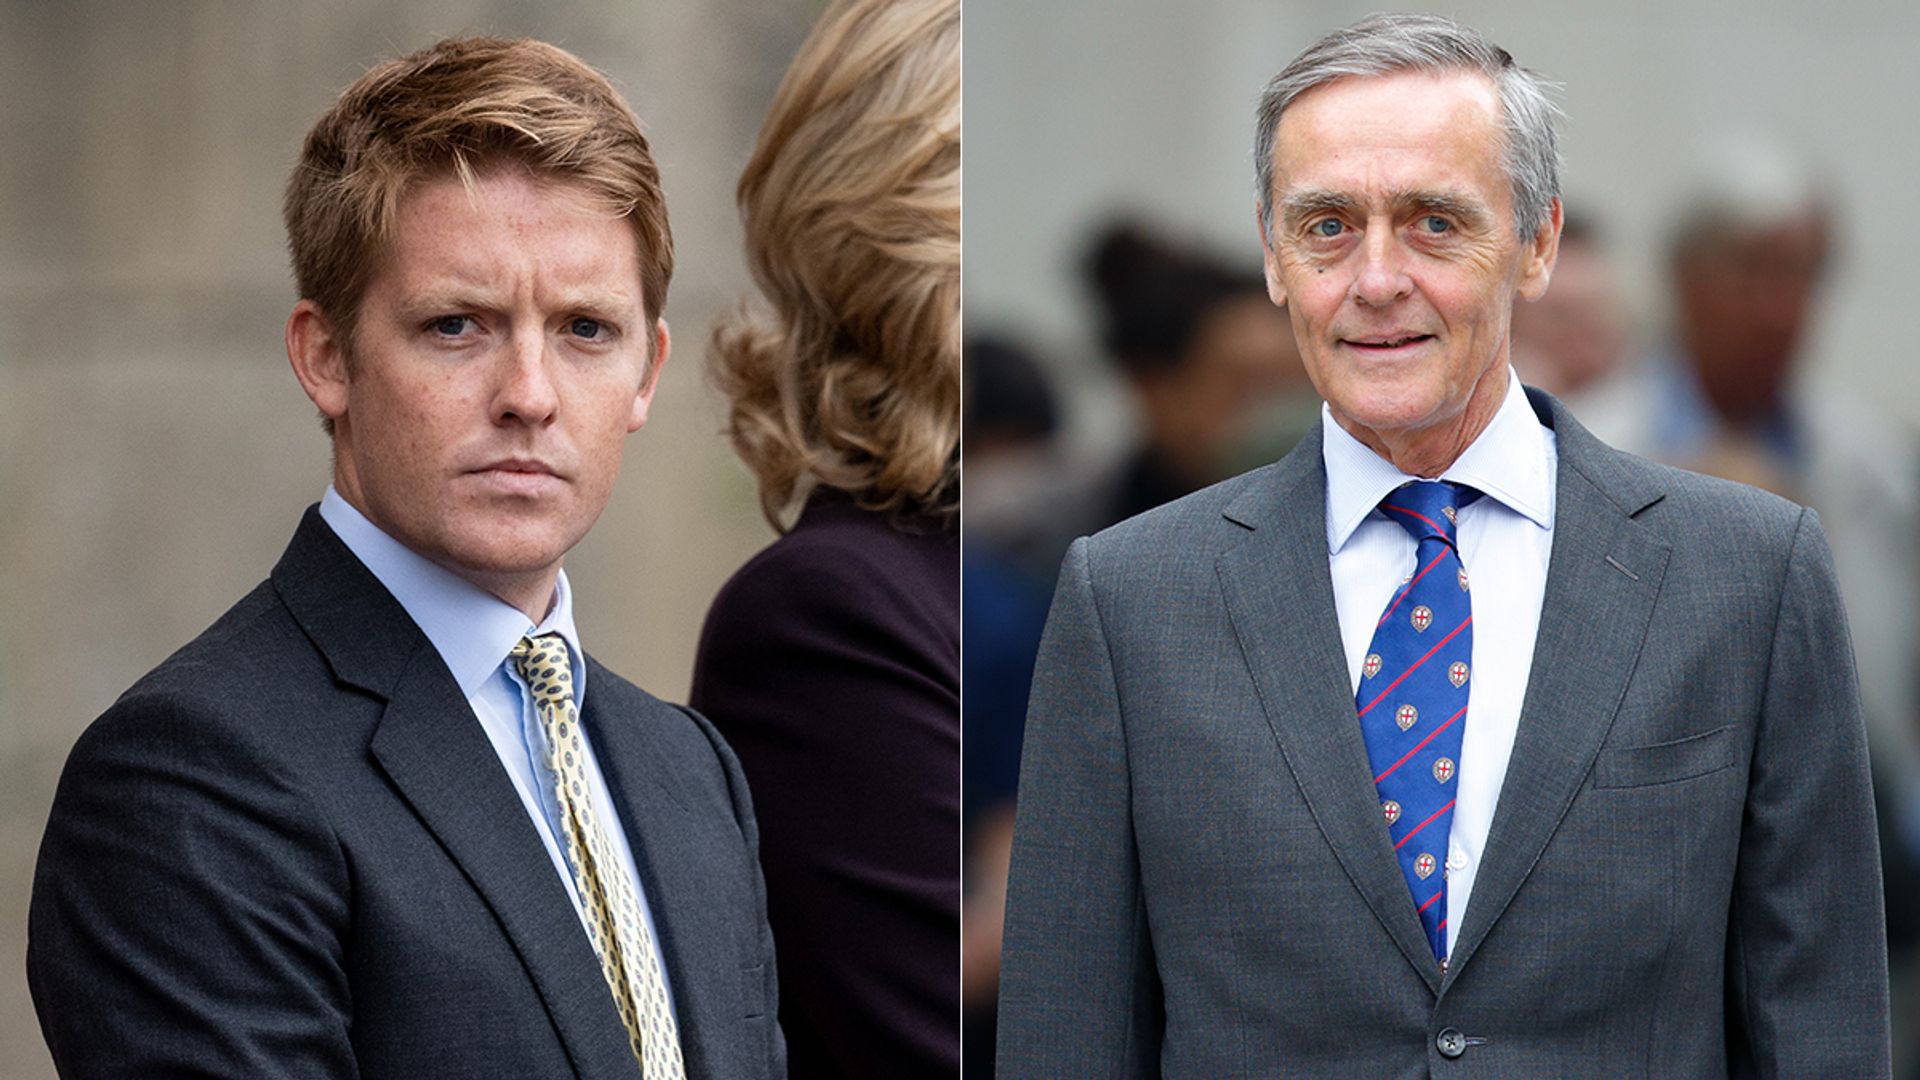 The heartbreaking story behind the Duke of Westminster's father's untimely death